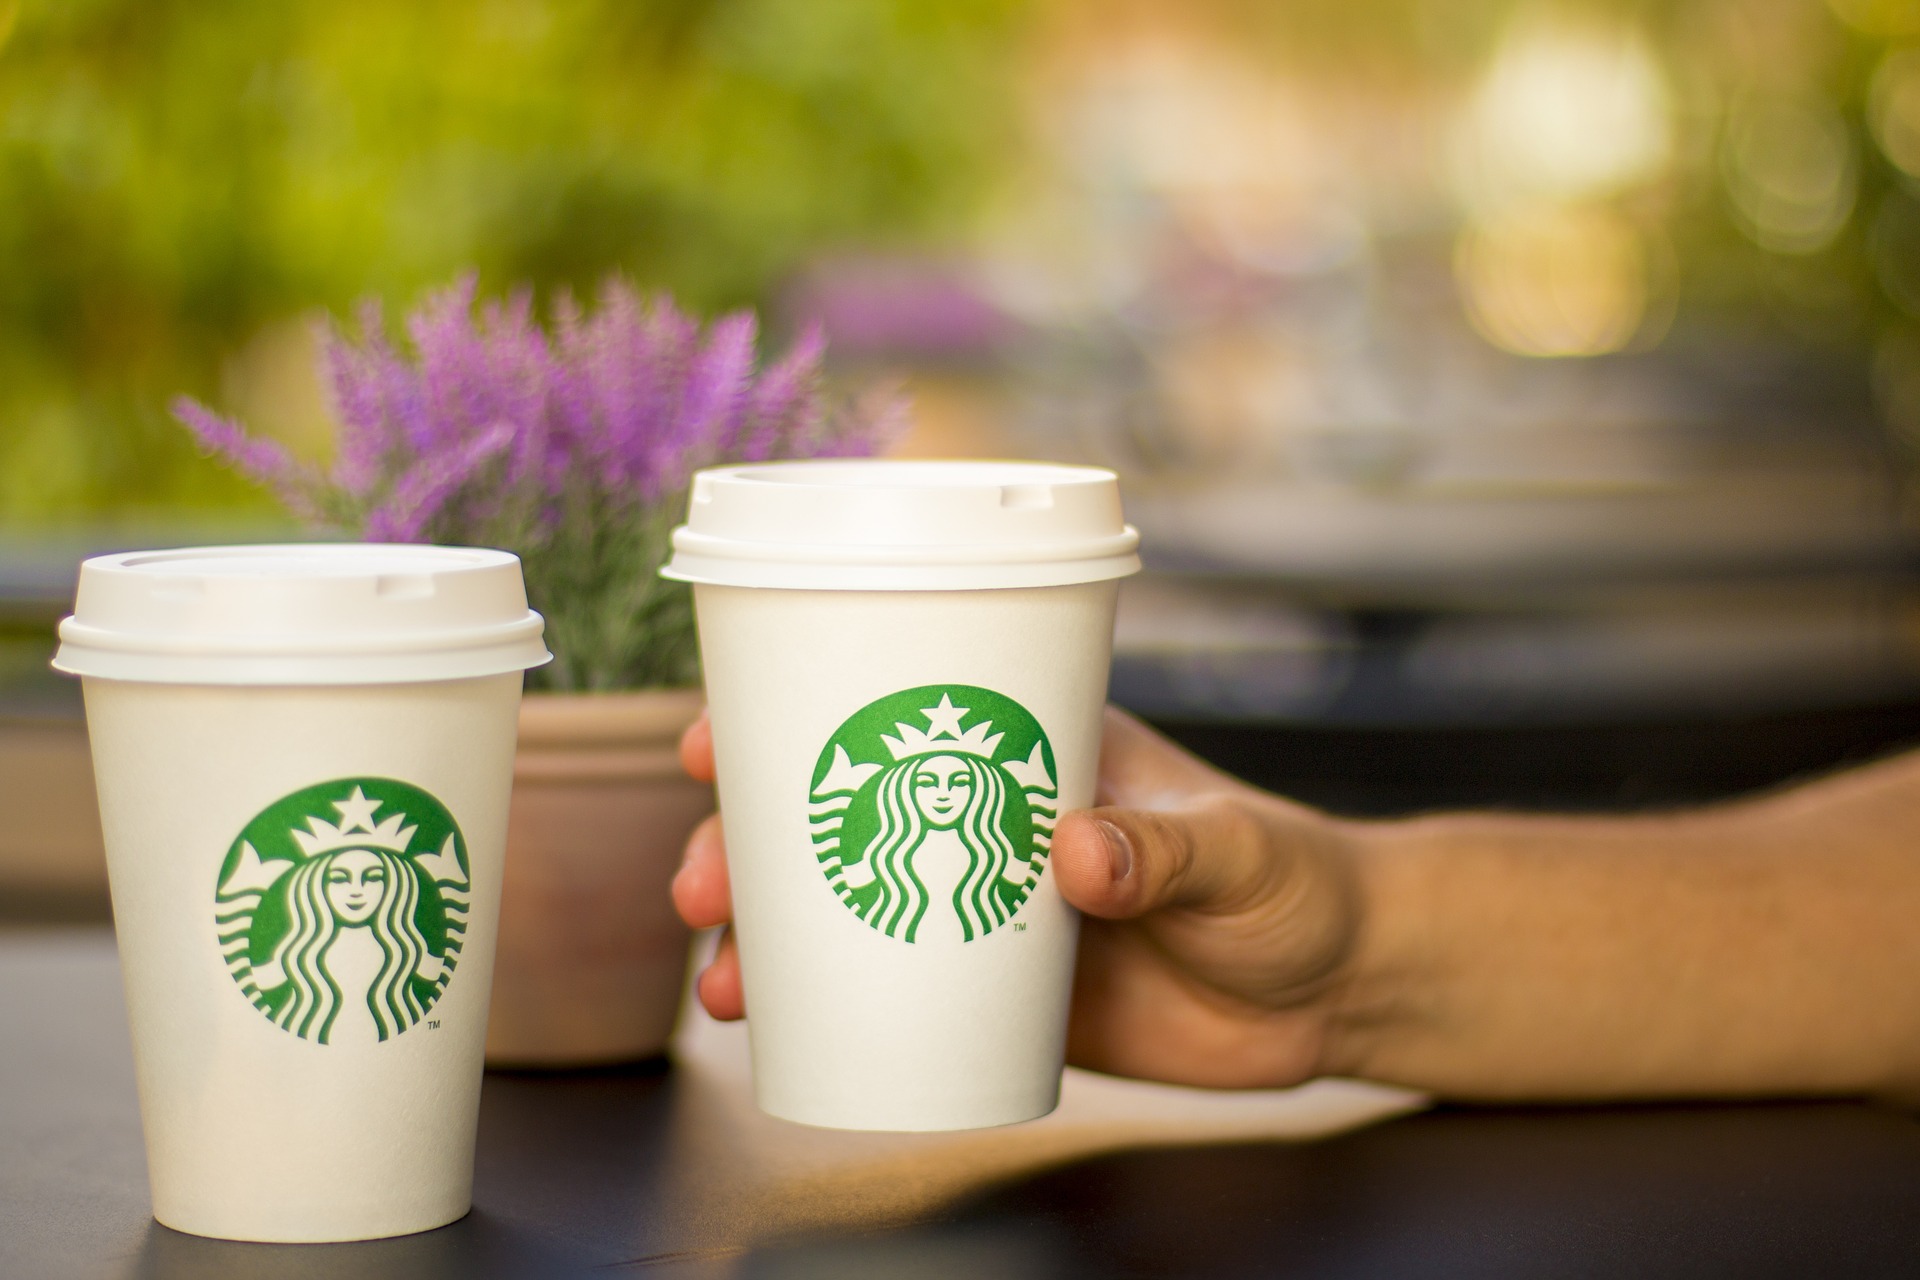 This is why Starbucks' drink sizes are Tall, Grande, and Venti